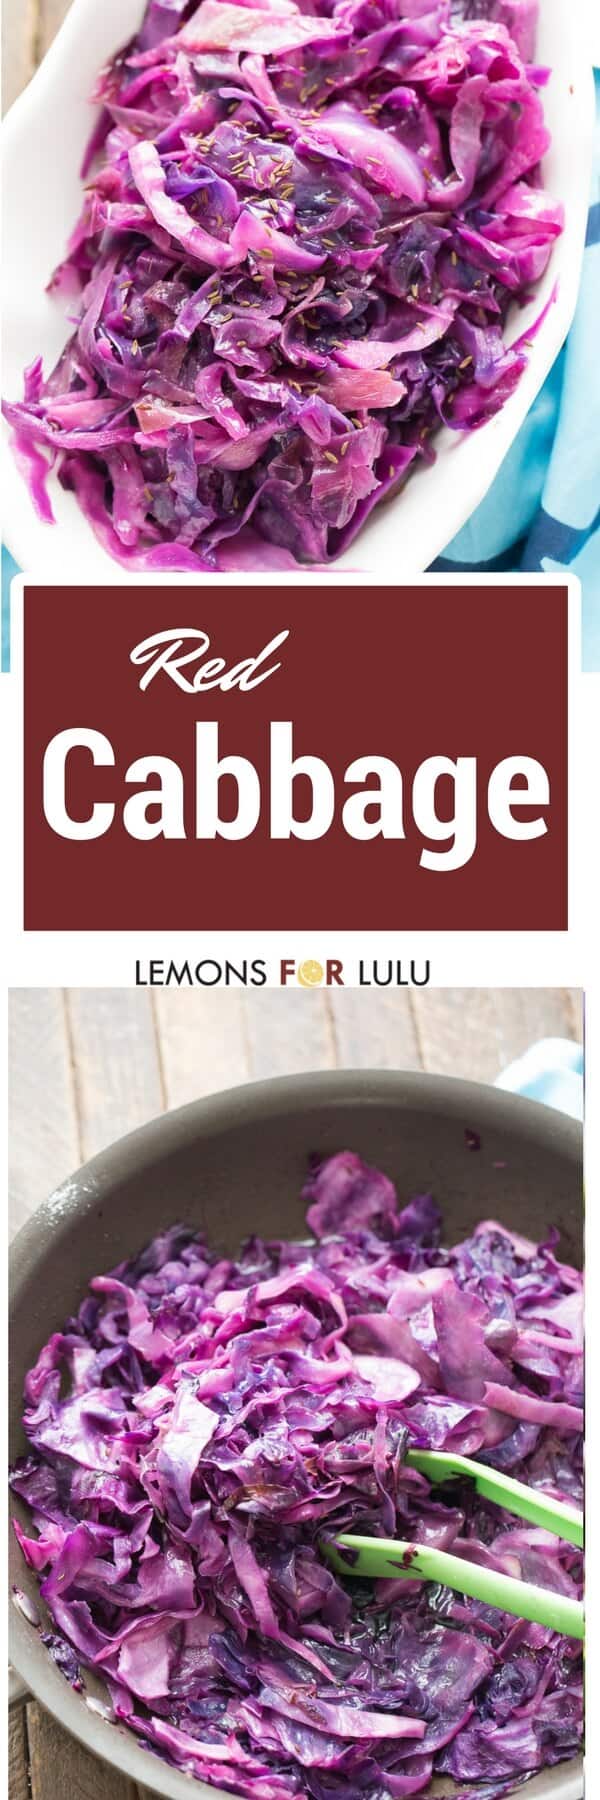 Simple recipes can be so good! This red cabbage recipe is definitely simple plus it tastes great and goes with anything!